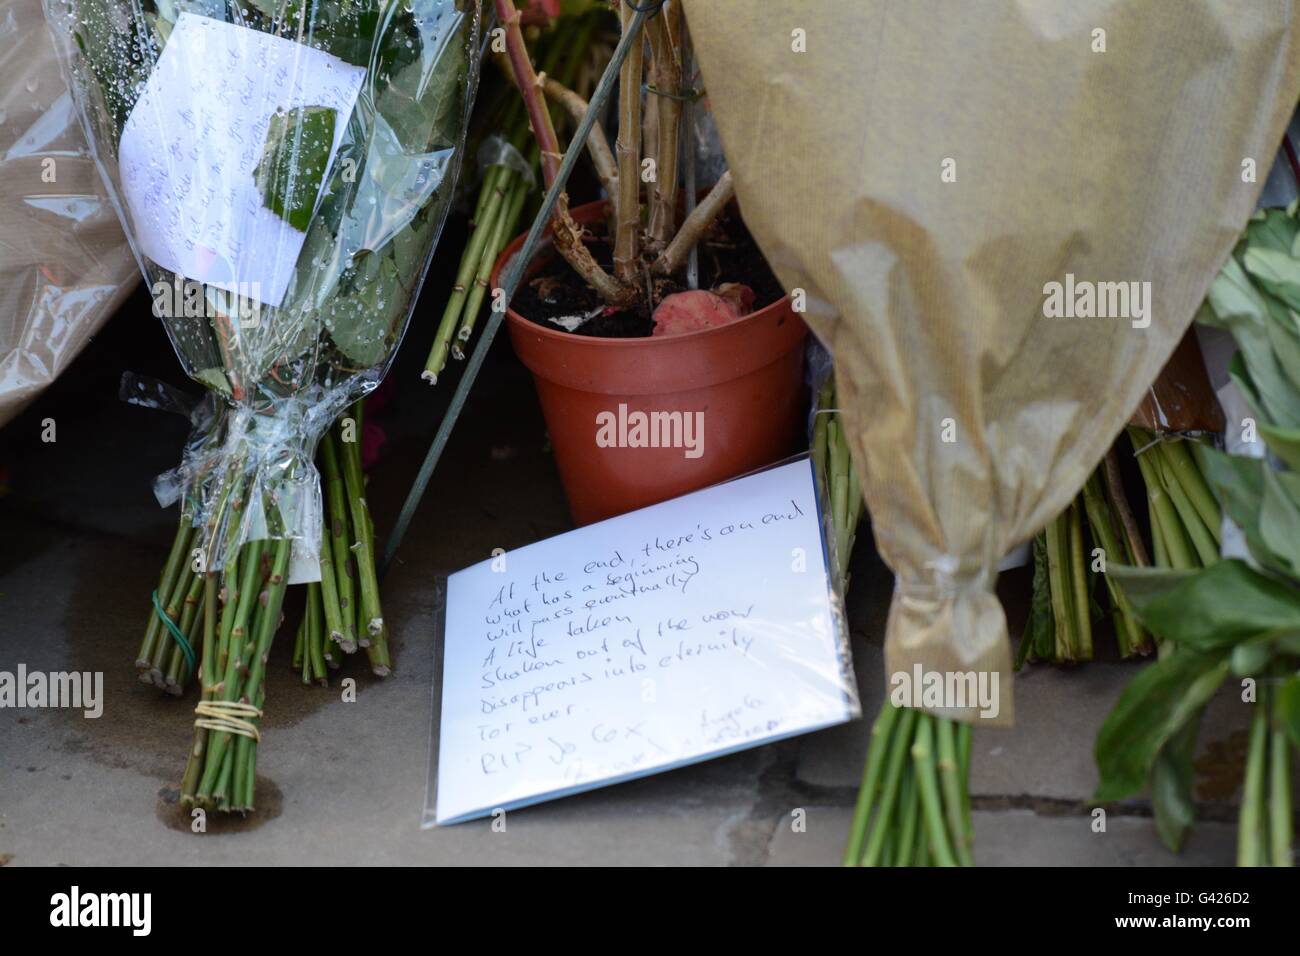 London, England. 17 June 2016. Floral tributes left for slain MP Jo Cox following her death. Credit: Marc Ward/Alamy Live News Stock Photo